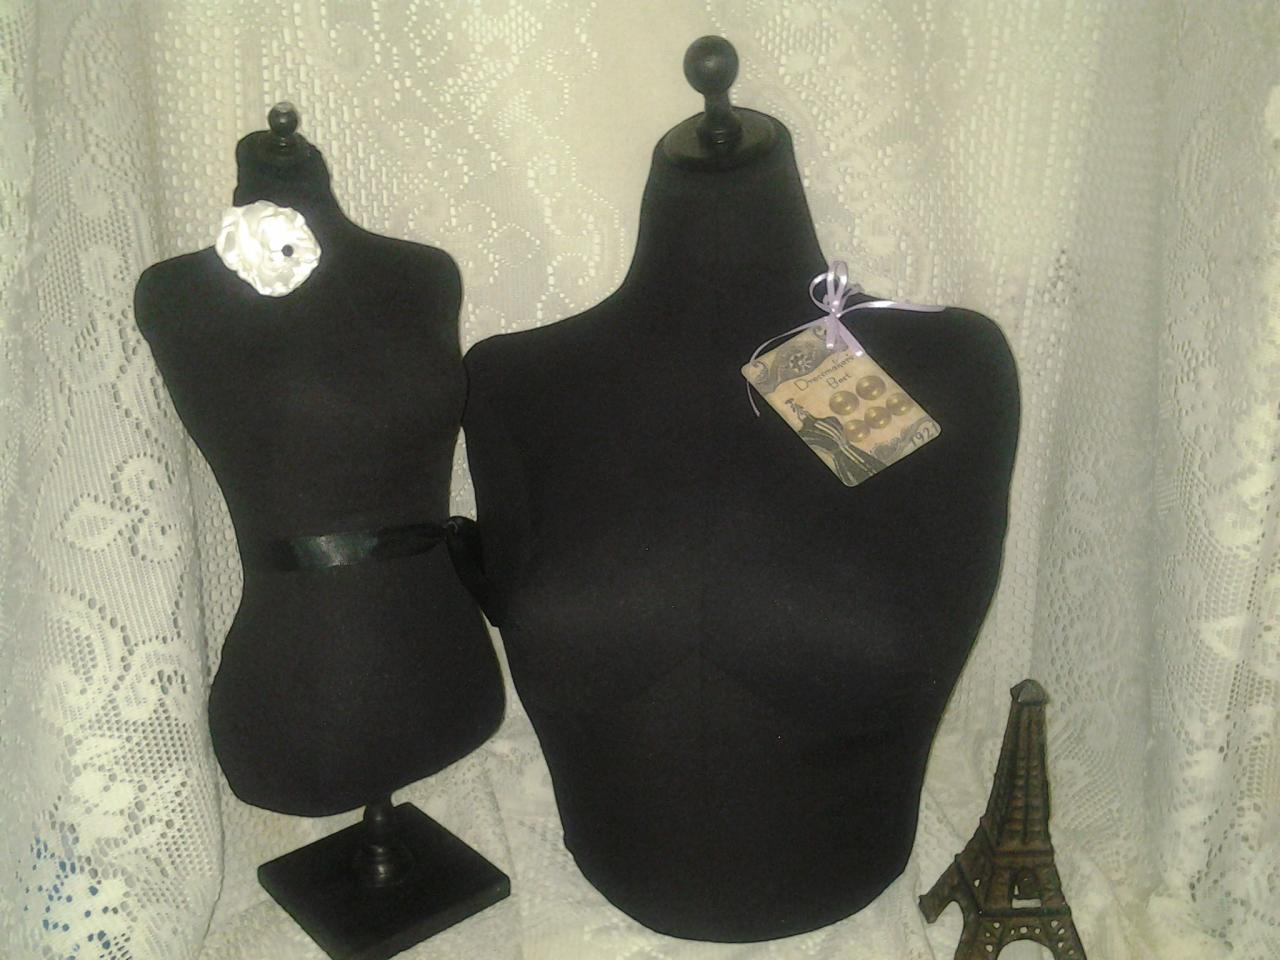 Bellacocette Black Bust Form And 19 Inch Dress Form Jewelry Display Set, Craft Fair Or Home Decor.